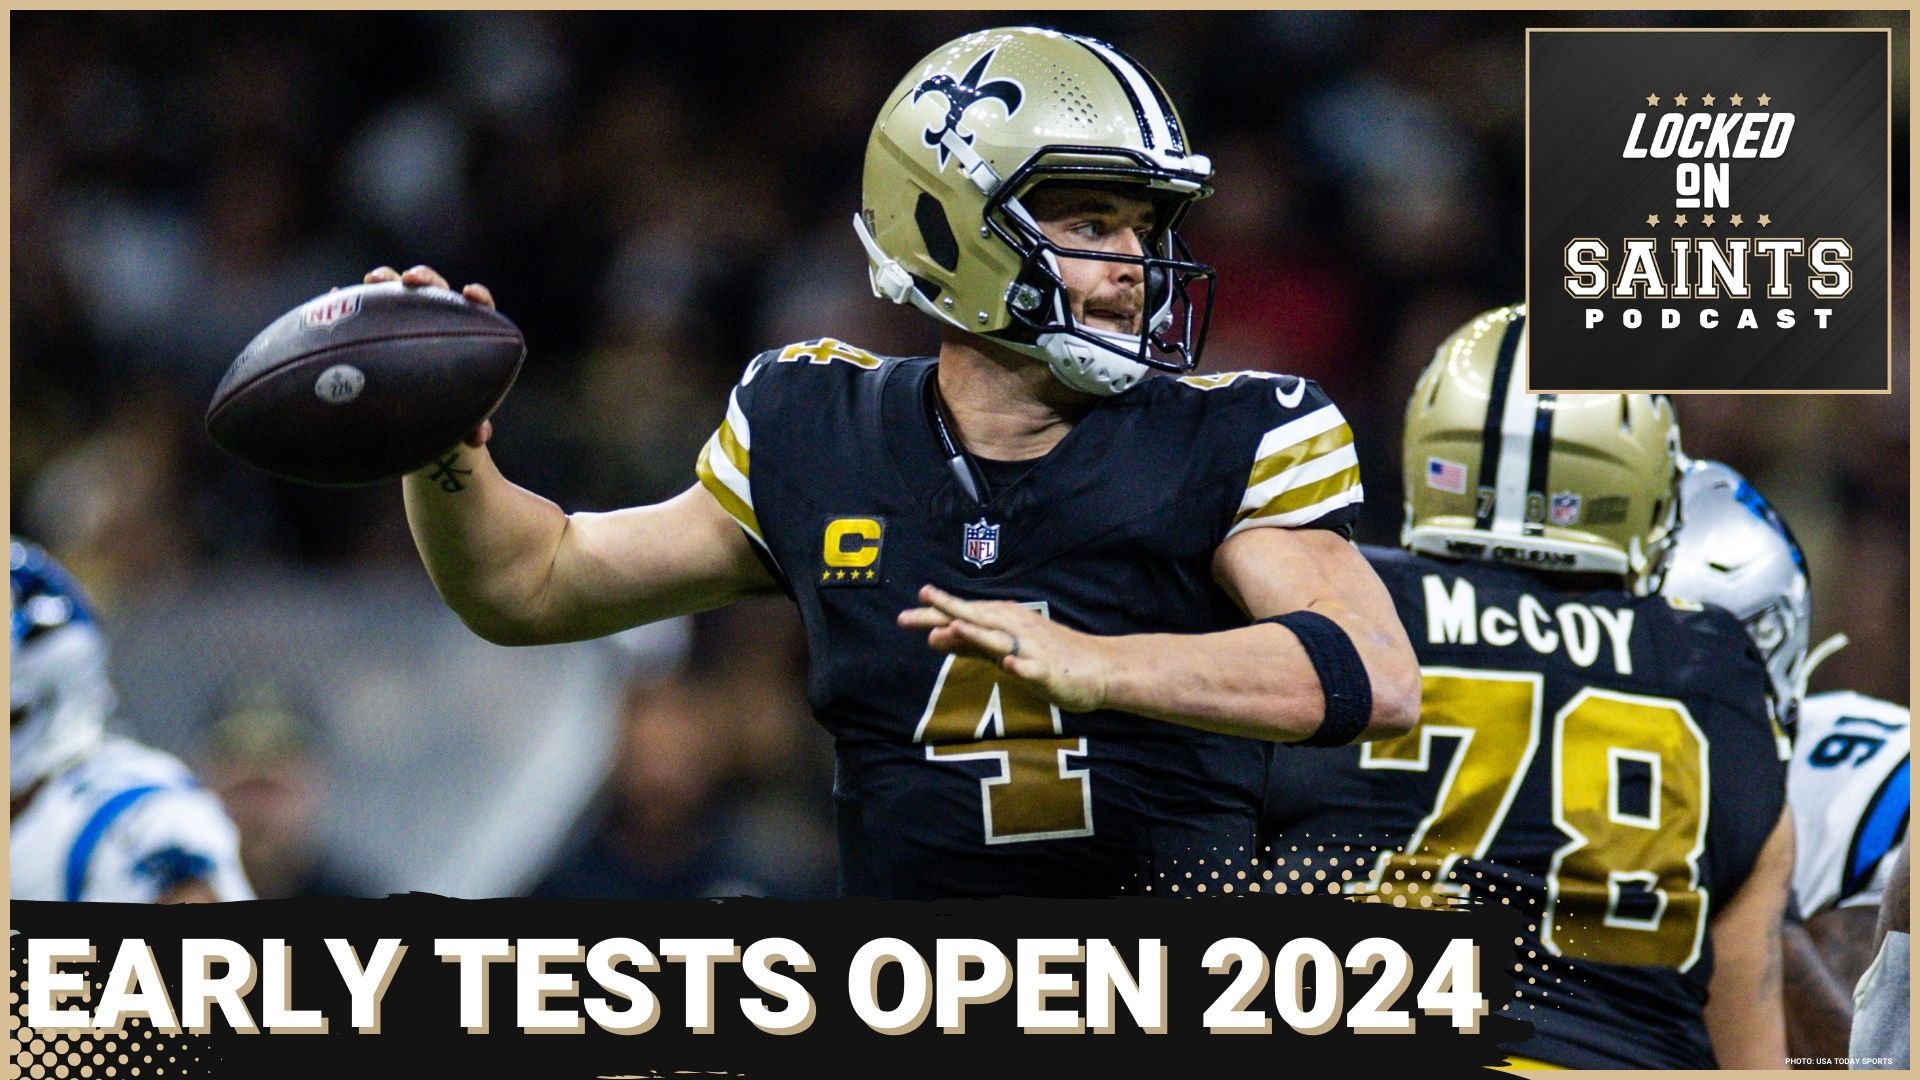 The New Orleans Saints, Dennis Allen and Derek Carr will kick off an incredibly important season at home for the 2024 NFL season schedule.